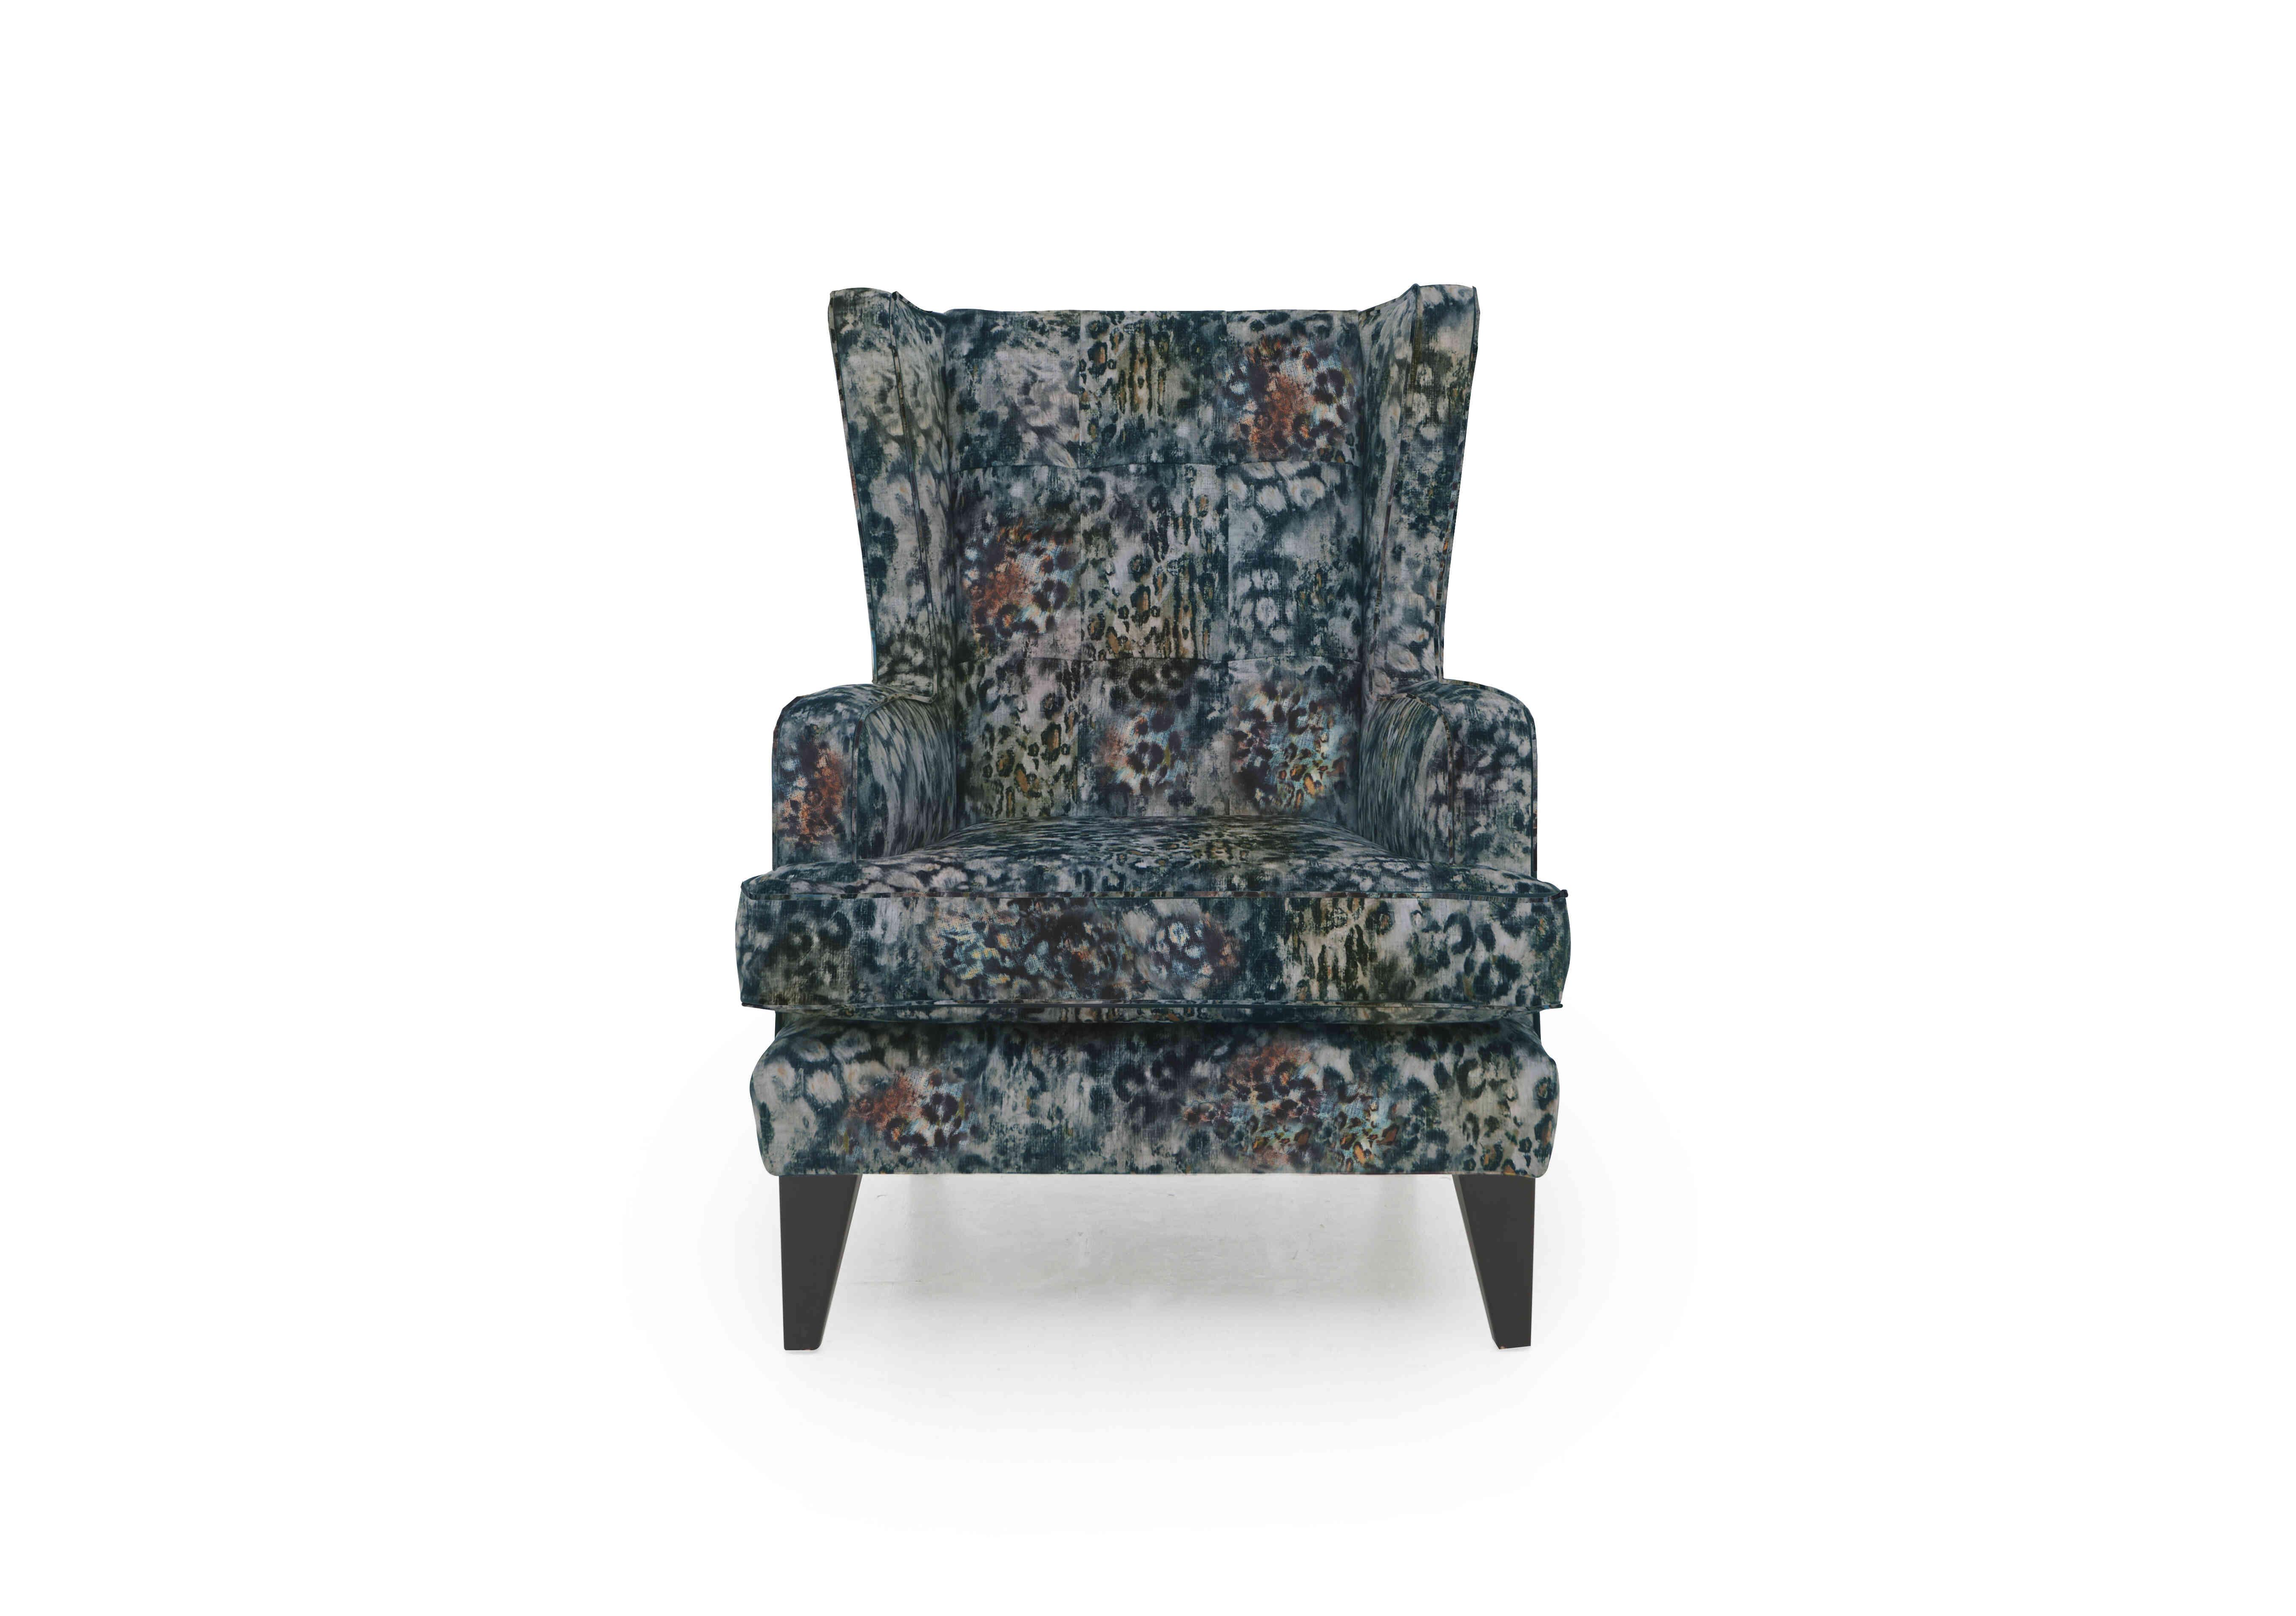 Modern Classics Wing Chair in Inca Teal Sp Mf on Furniture Village